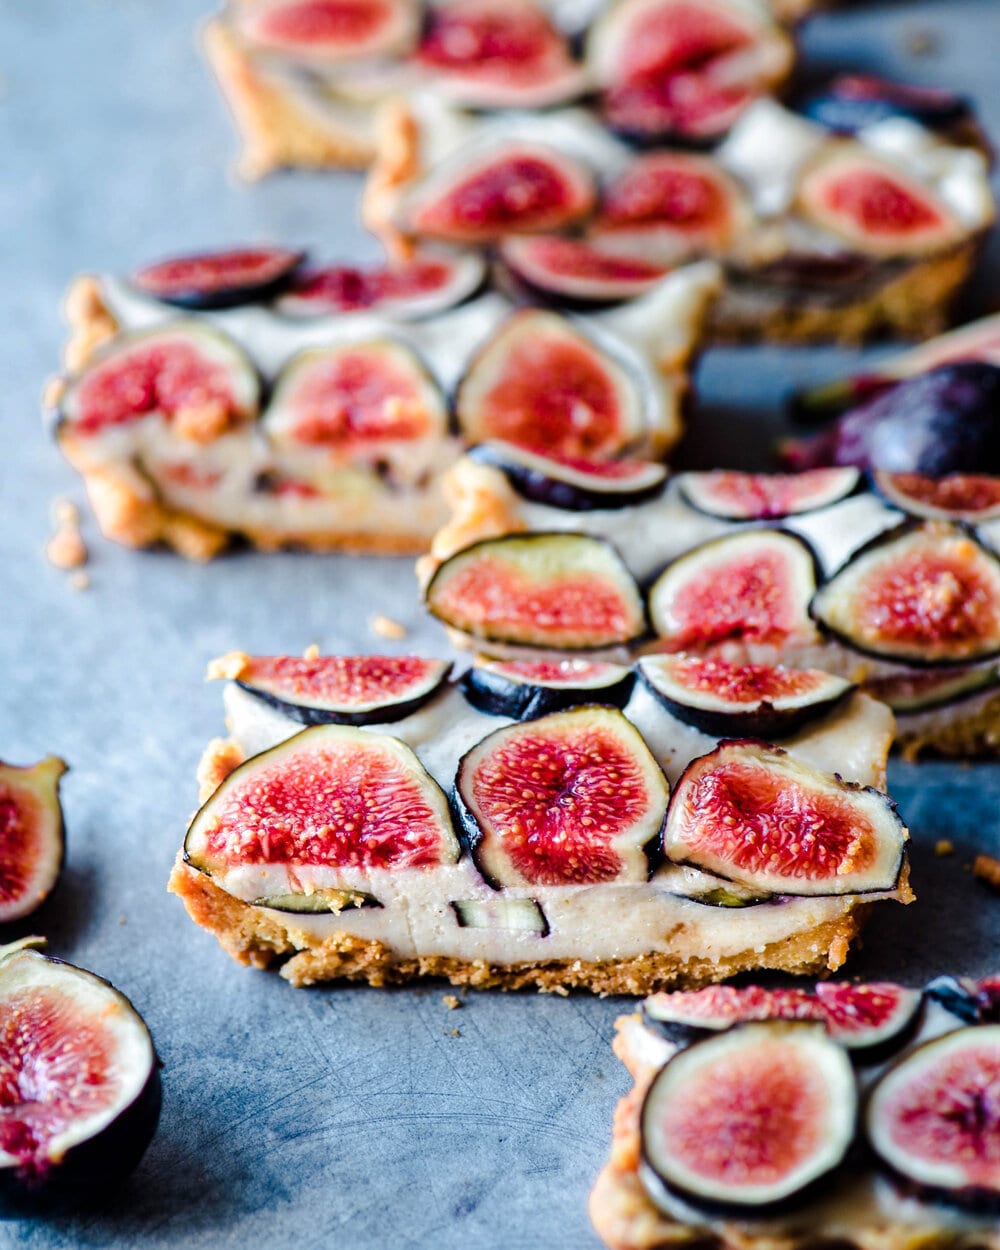 Side close up view of slices of fig tart on blue-grey table.